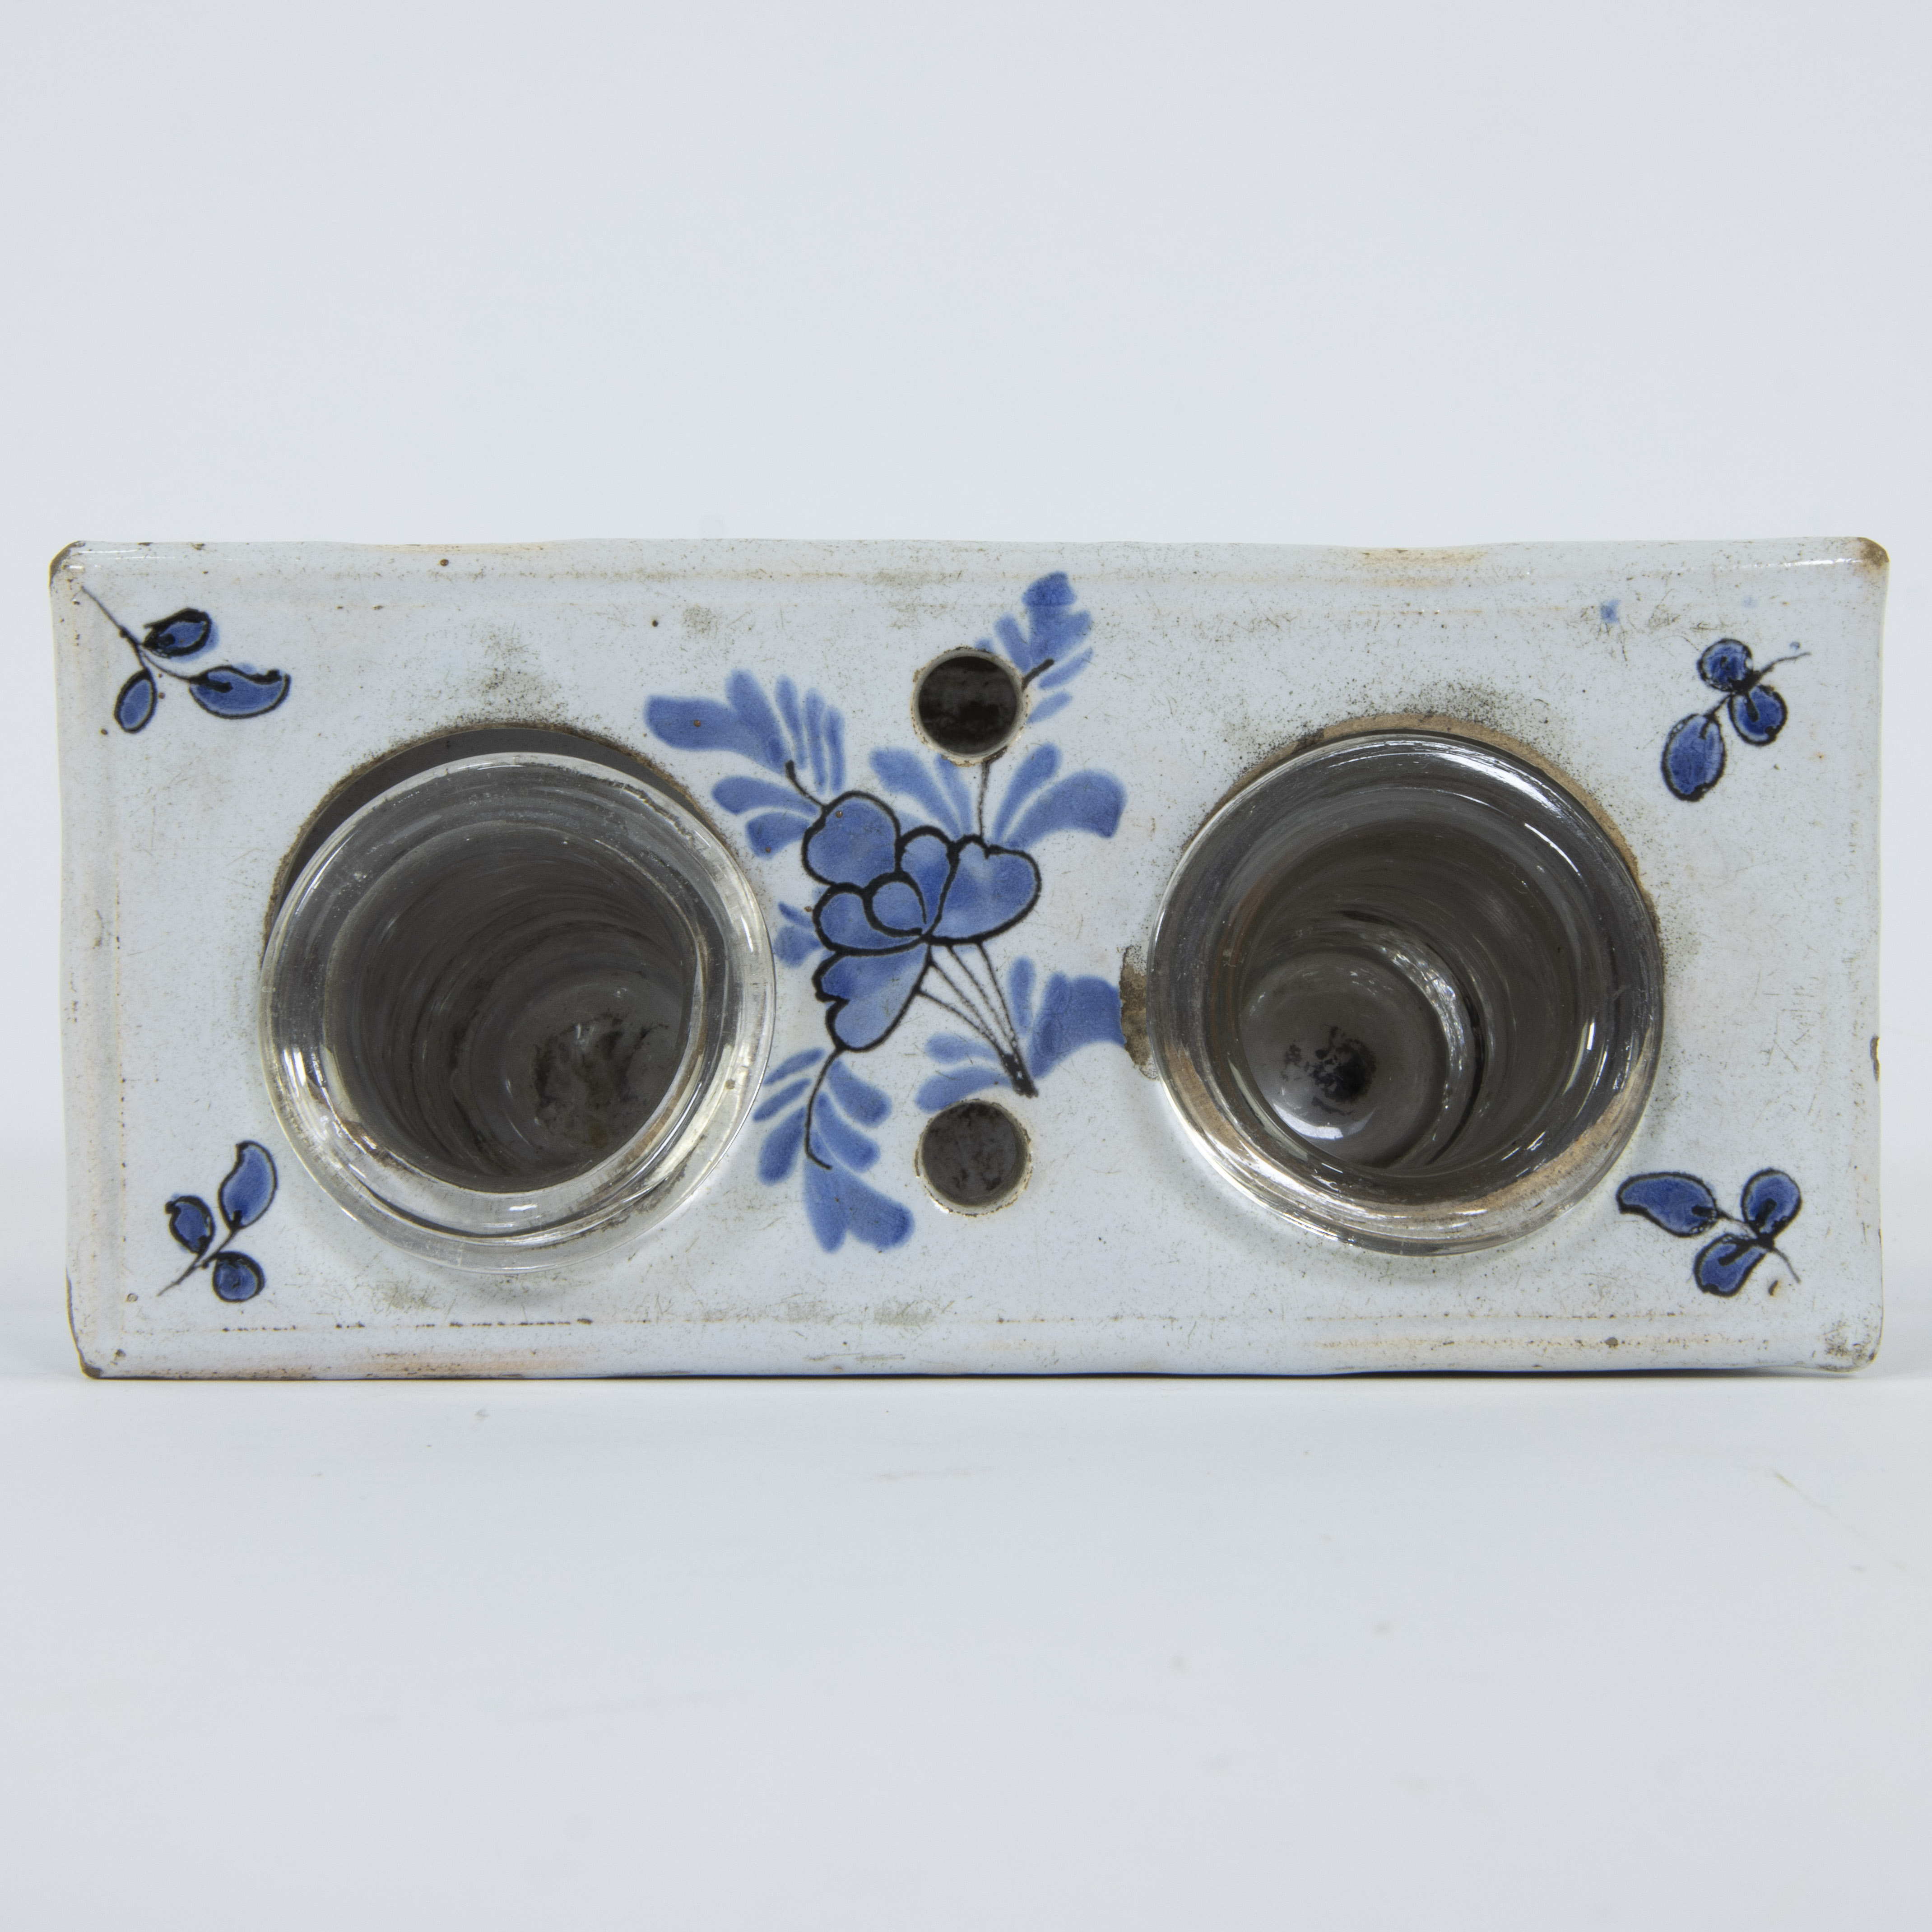 2 Delft tiles and an inkwell, 18th century - Image 6 of 6